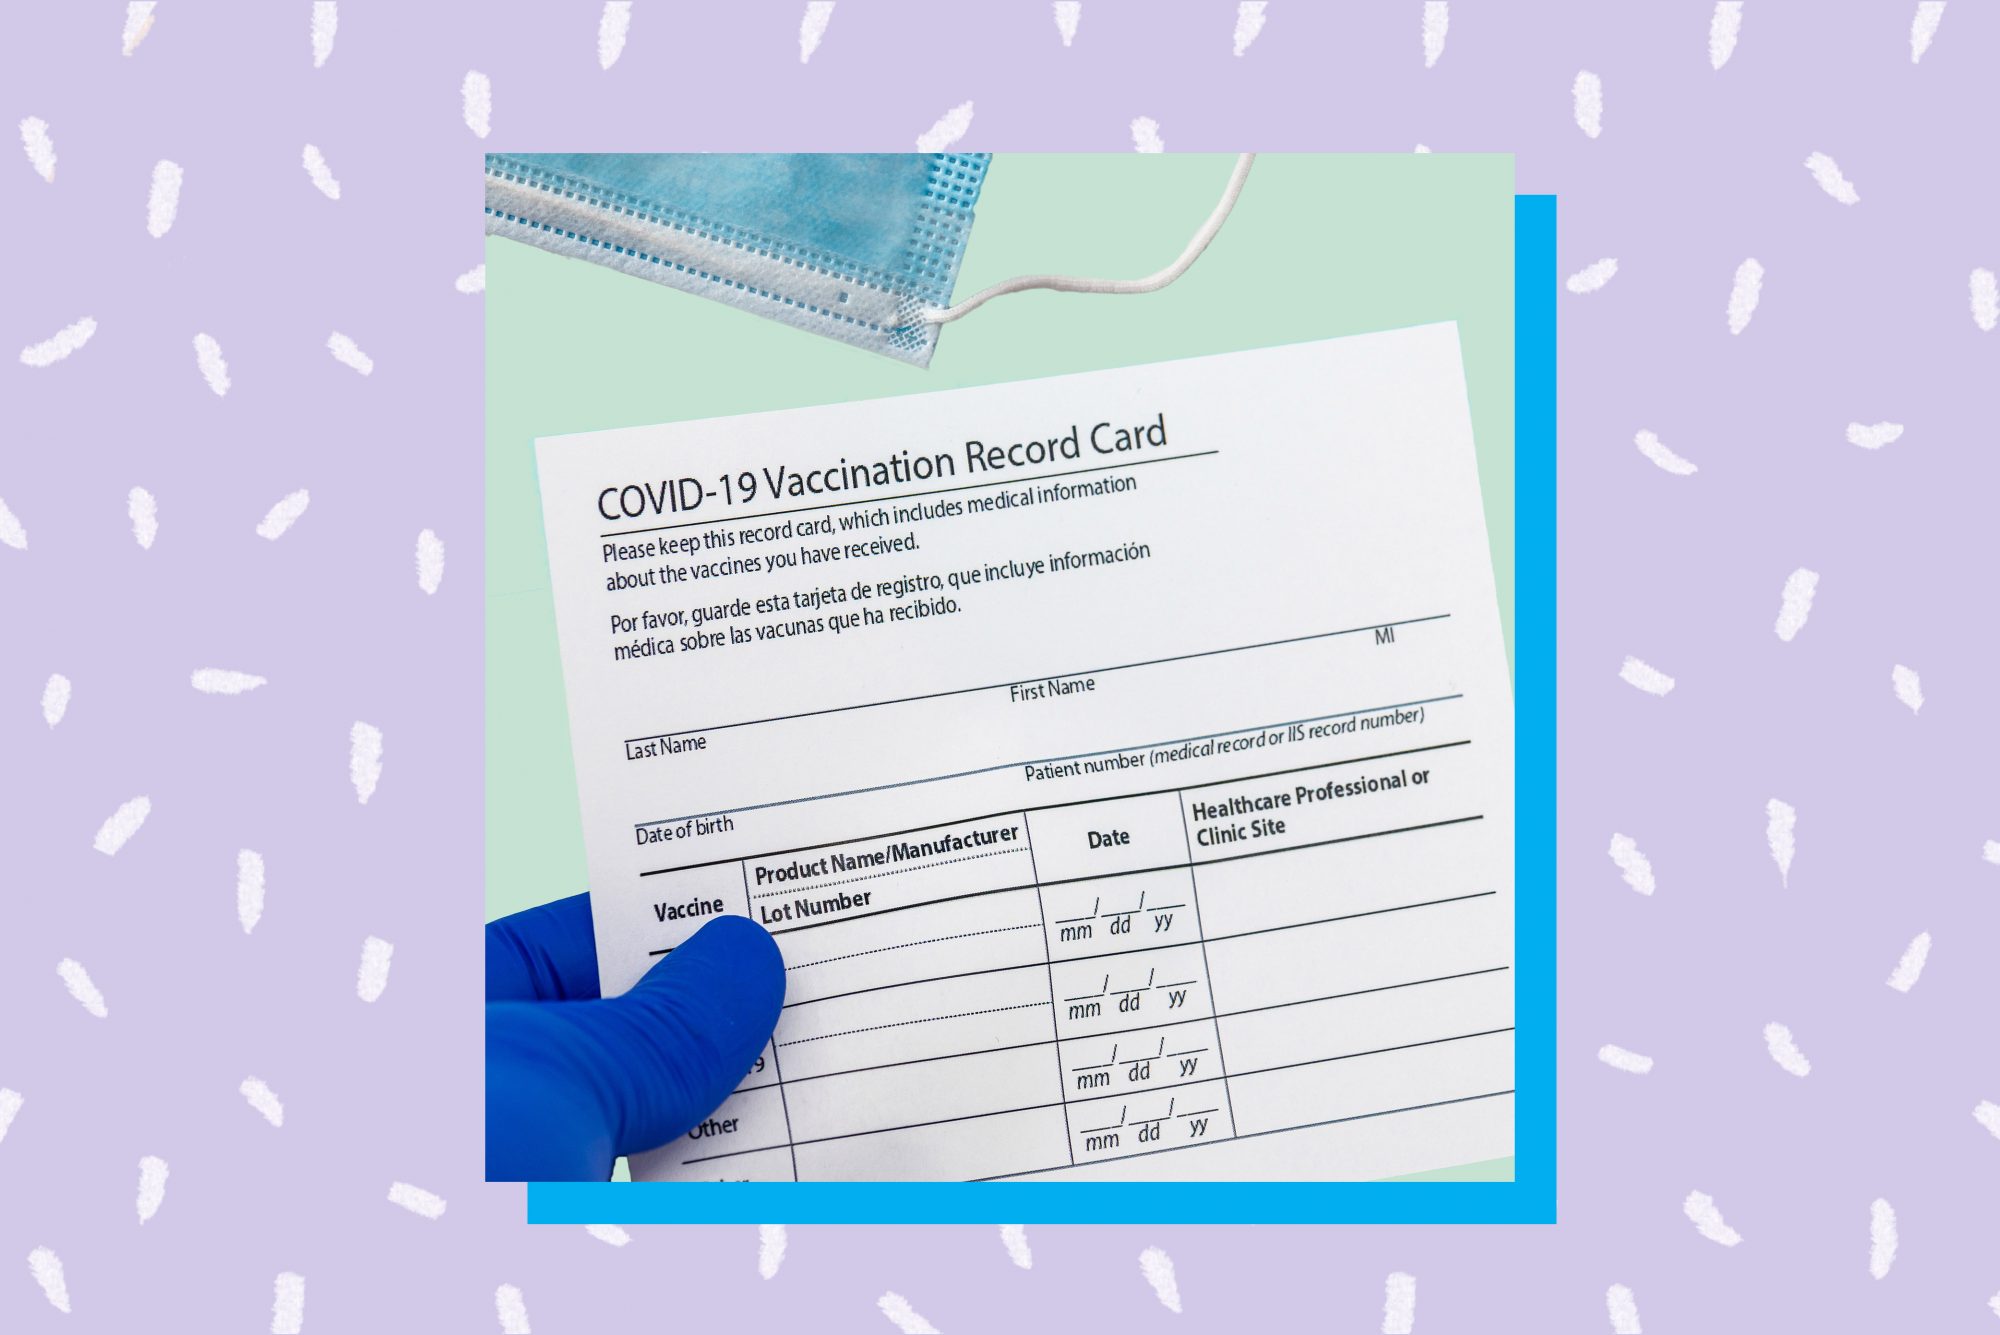 An image of a COVID-19 vaccination card on a colorful background.